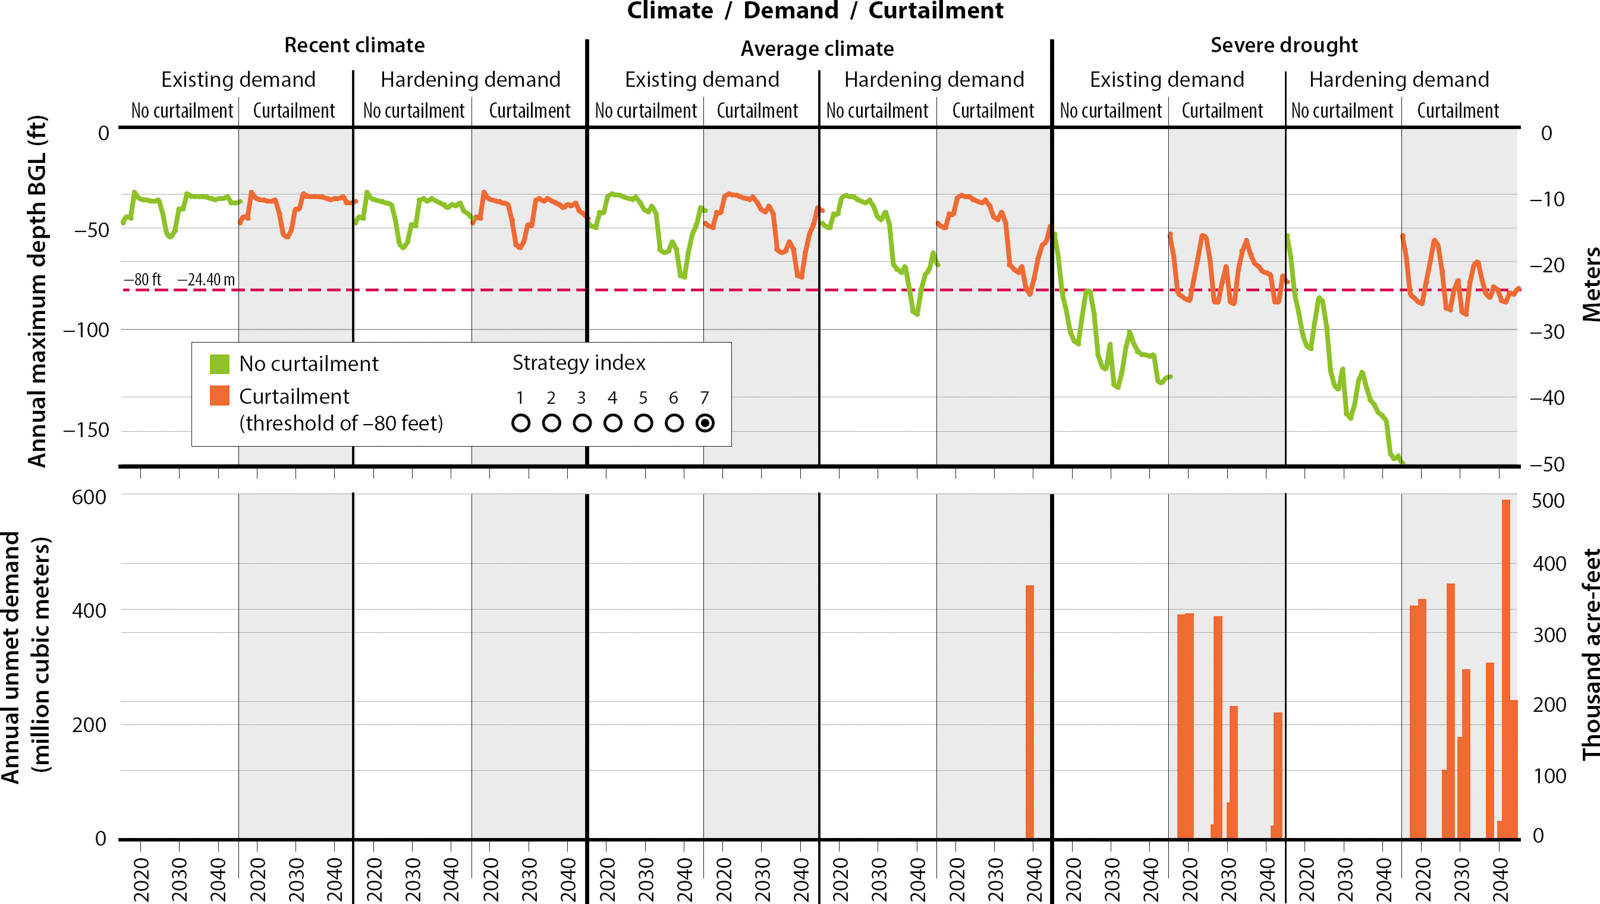 Modeled maximum annual depths of groundwater below ground level (BGL) (top panel) and unmet irrigation demand (bottom panel) for each climate and demand scenario corresponding to Strategy 7. Groundwater depths recover to existing levels in the nondrought climates and stay above the 80-foot threshold (dotted line, top panel) except in one year, under the hardening demand scenario. In the two severe drought scenarios without groundwater use curtailments, groundwater levels fall, reaching about 125 to 164 feet. When groundwater pumping is curtailed, levels remain close to the 80-foot threshold. In the worst-case scenario (bottom right panel) under Strategy 7, there are 12 years with irrigation water shortages (unmet demand> 0). The largest shortage occurred in a year when there was little surface water available and the groundwater level exceeded the threshold for pumping curtailment. We toggled through strategies to gauge the response of these two metrics of performance (unmet demand and groundwater depth) to each management action.